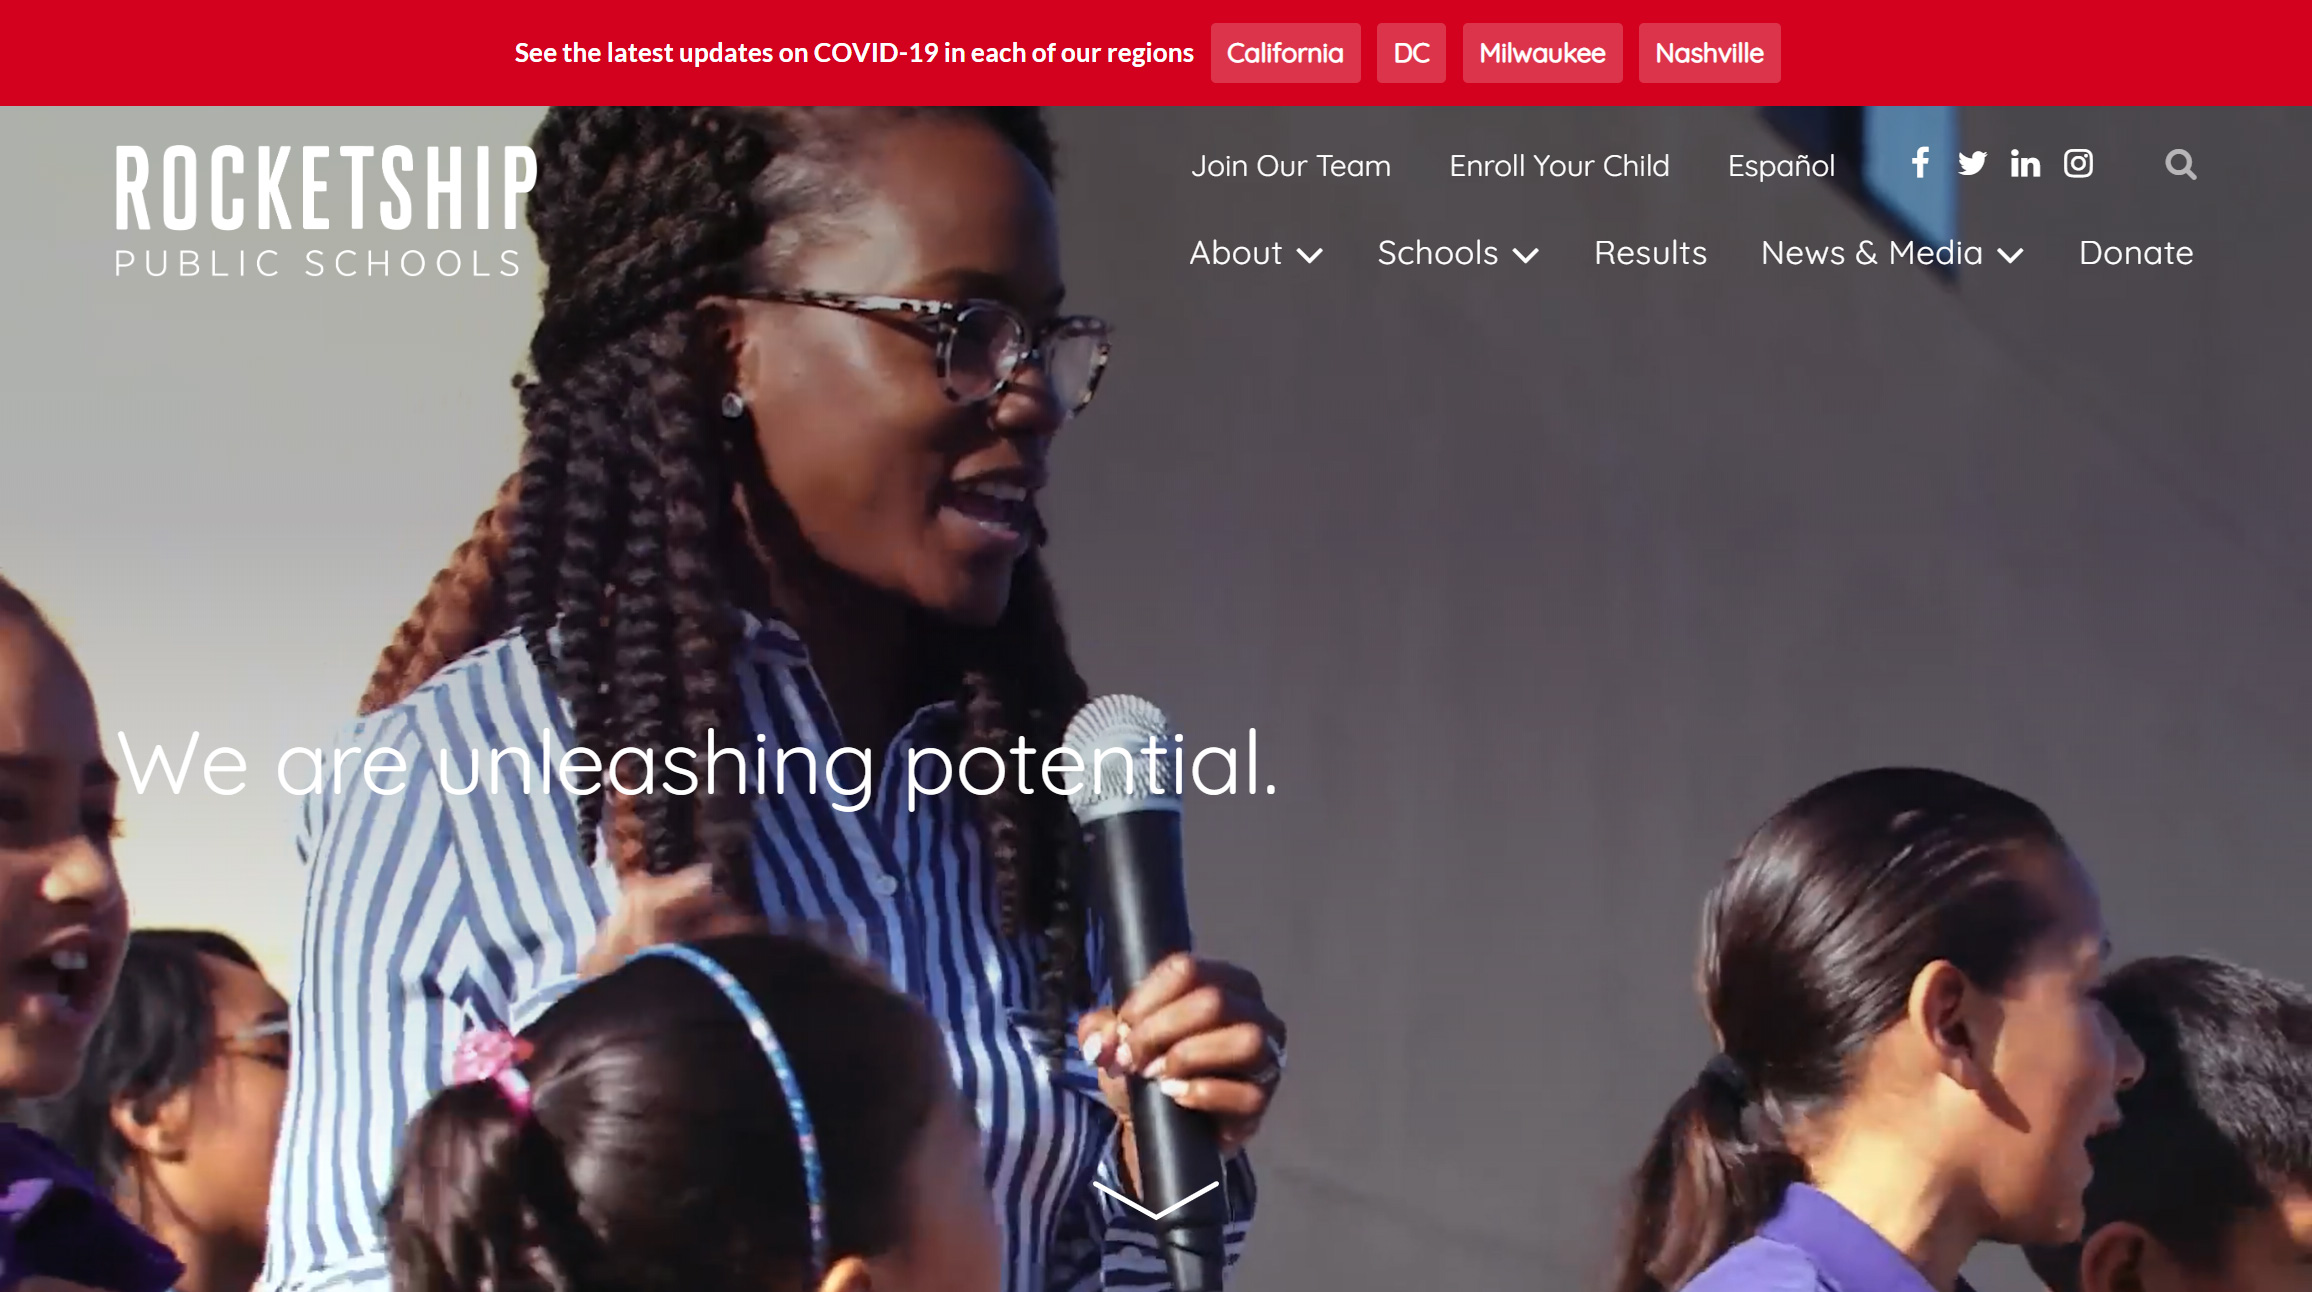 The Rocketship Public Schools banner (designed by Kalamuna) is a great example of how you can use multiple links to direct visitors to the resources that are most applicable to their needs.